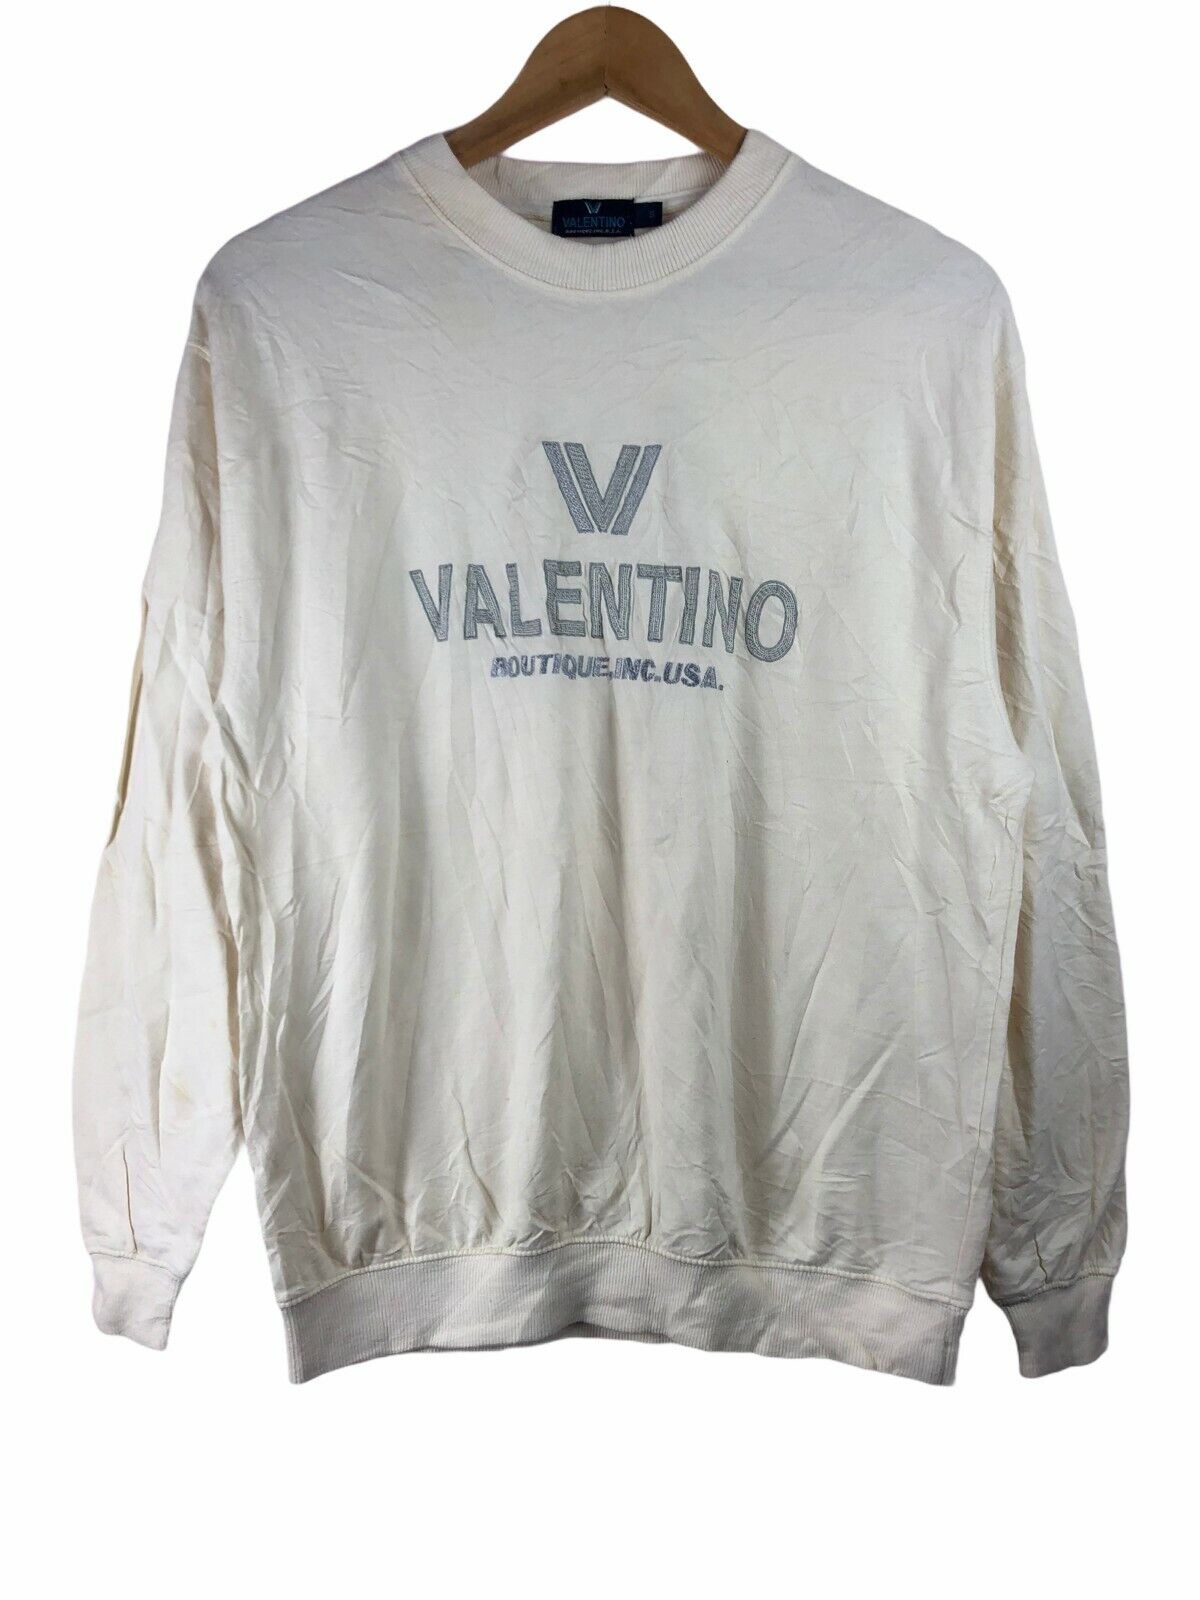 VINTAGE VALENTINO BOUTIQUE INC USA COLLECTION MADE IN ITALY SWEATSHIRTS